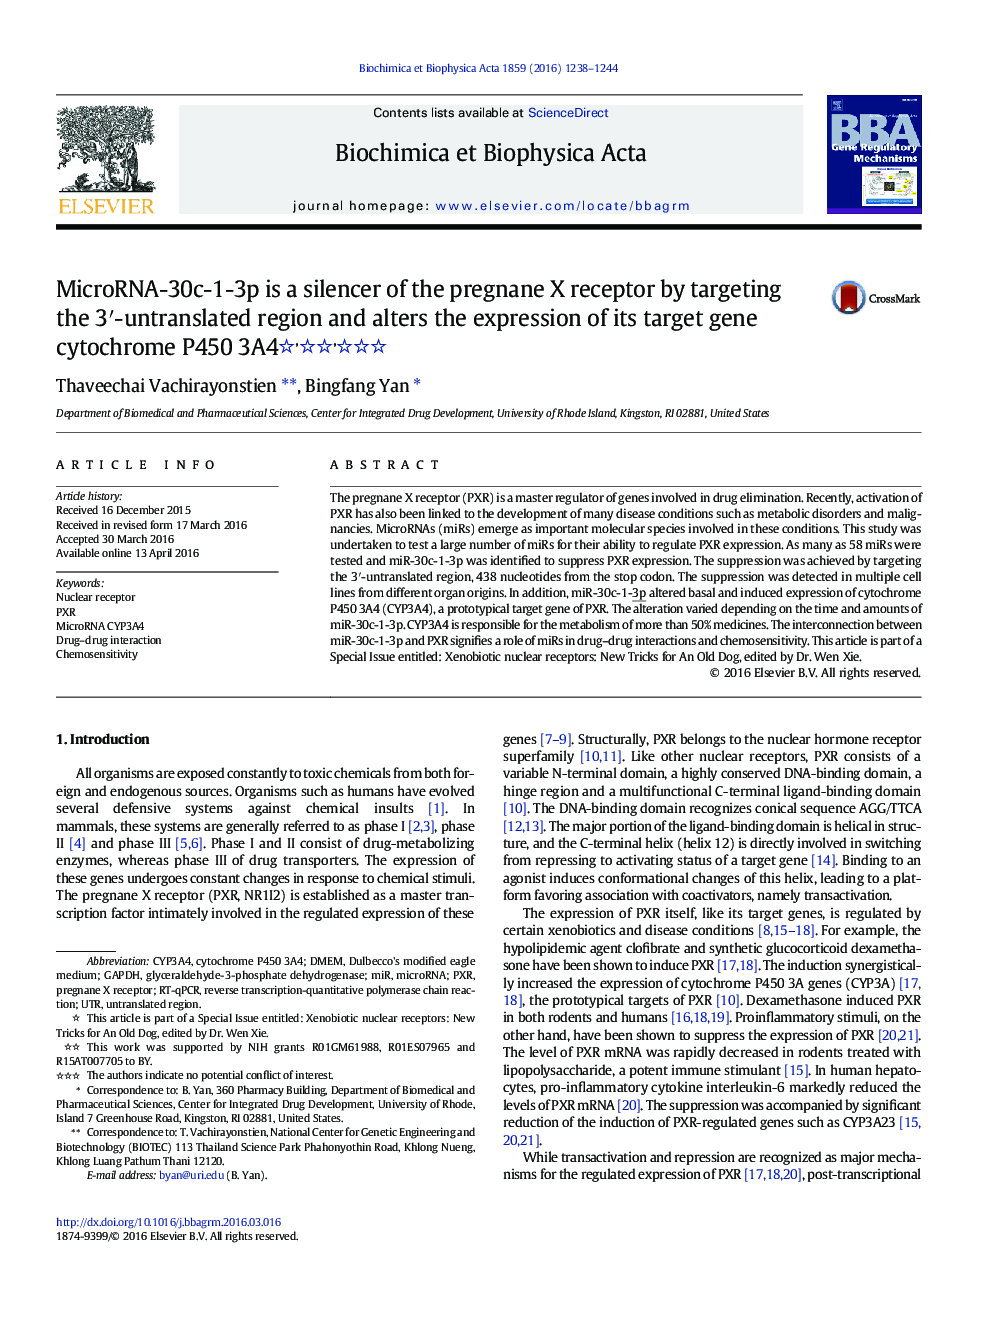 MicroRNA-30c-1-3p is a silencer of the pregnane X receptor by targeting the 3′-untranslated region and alters the expression of its target gene cytochrome P450 3A4 